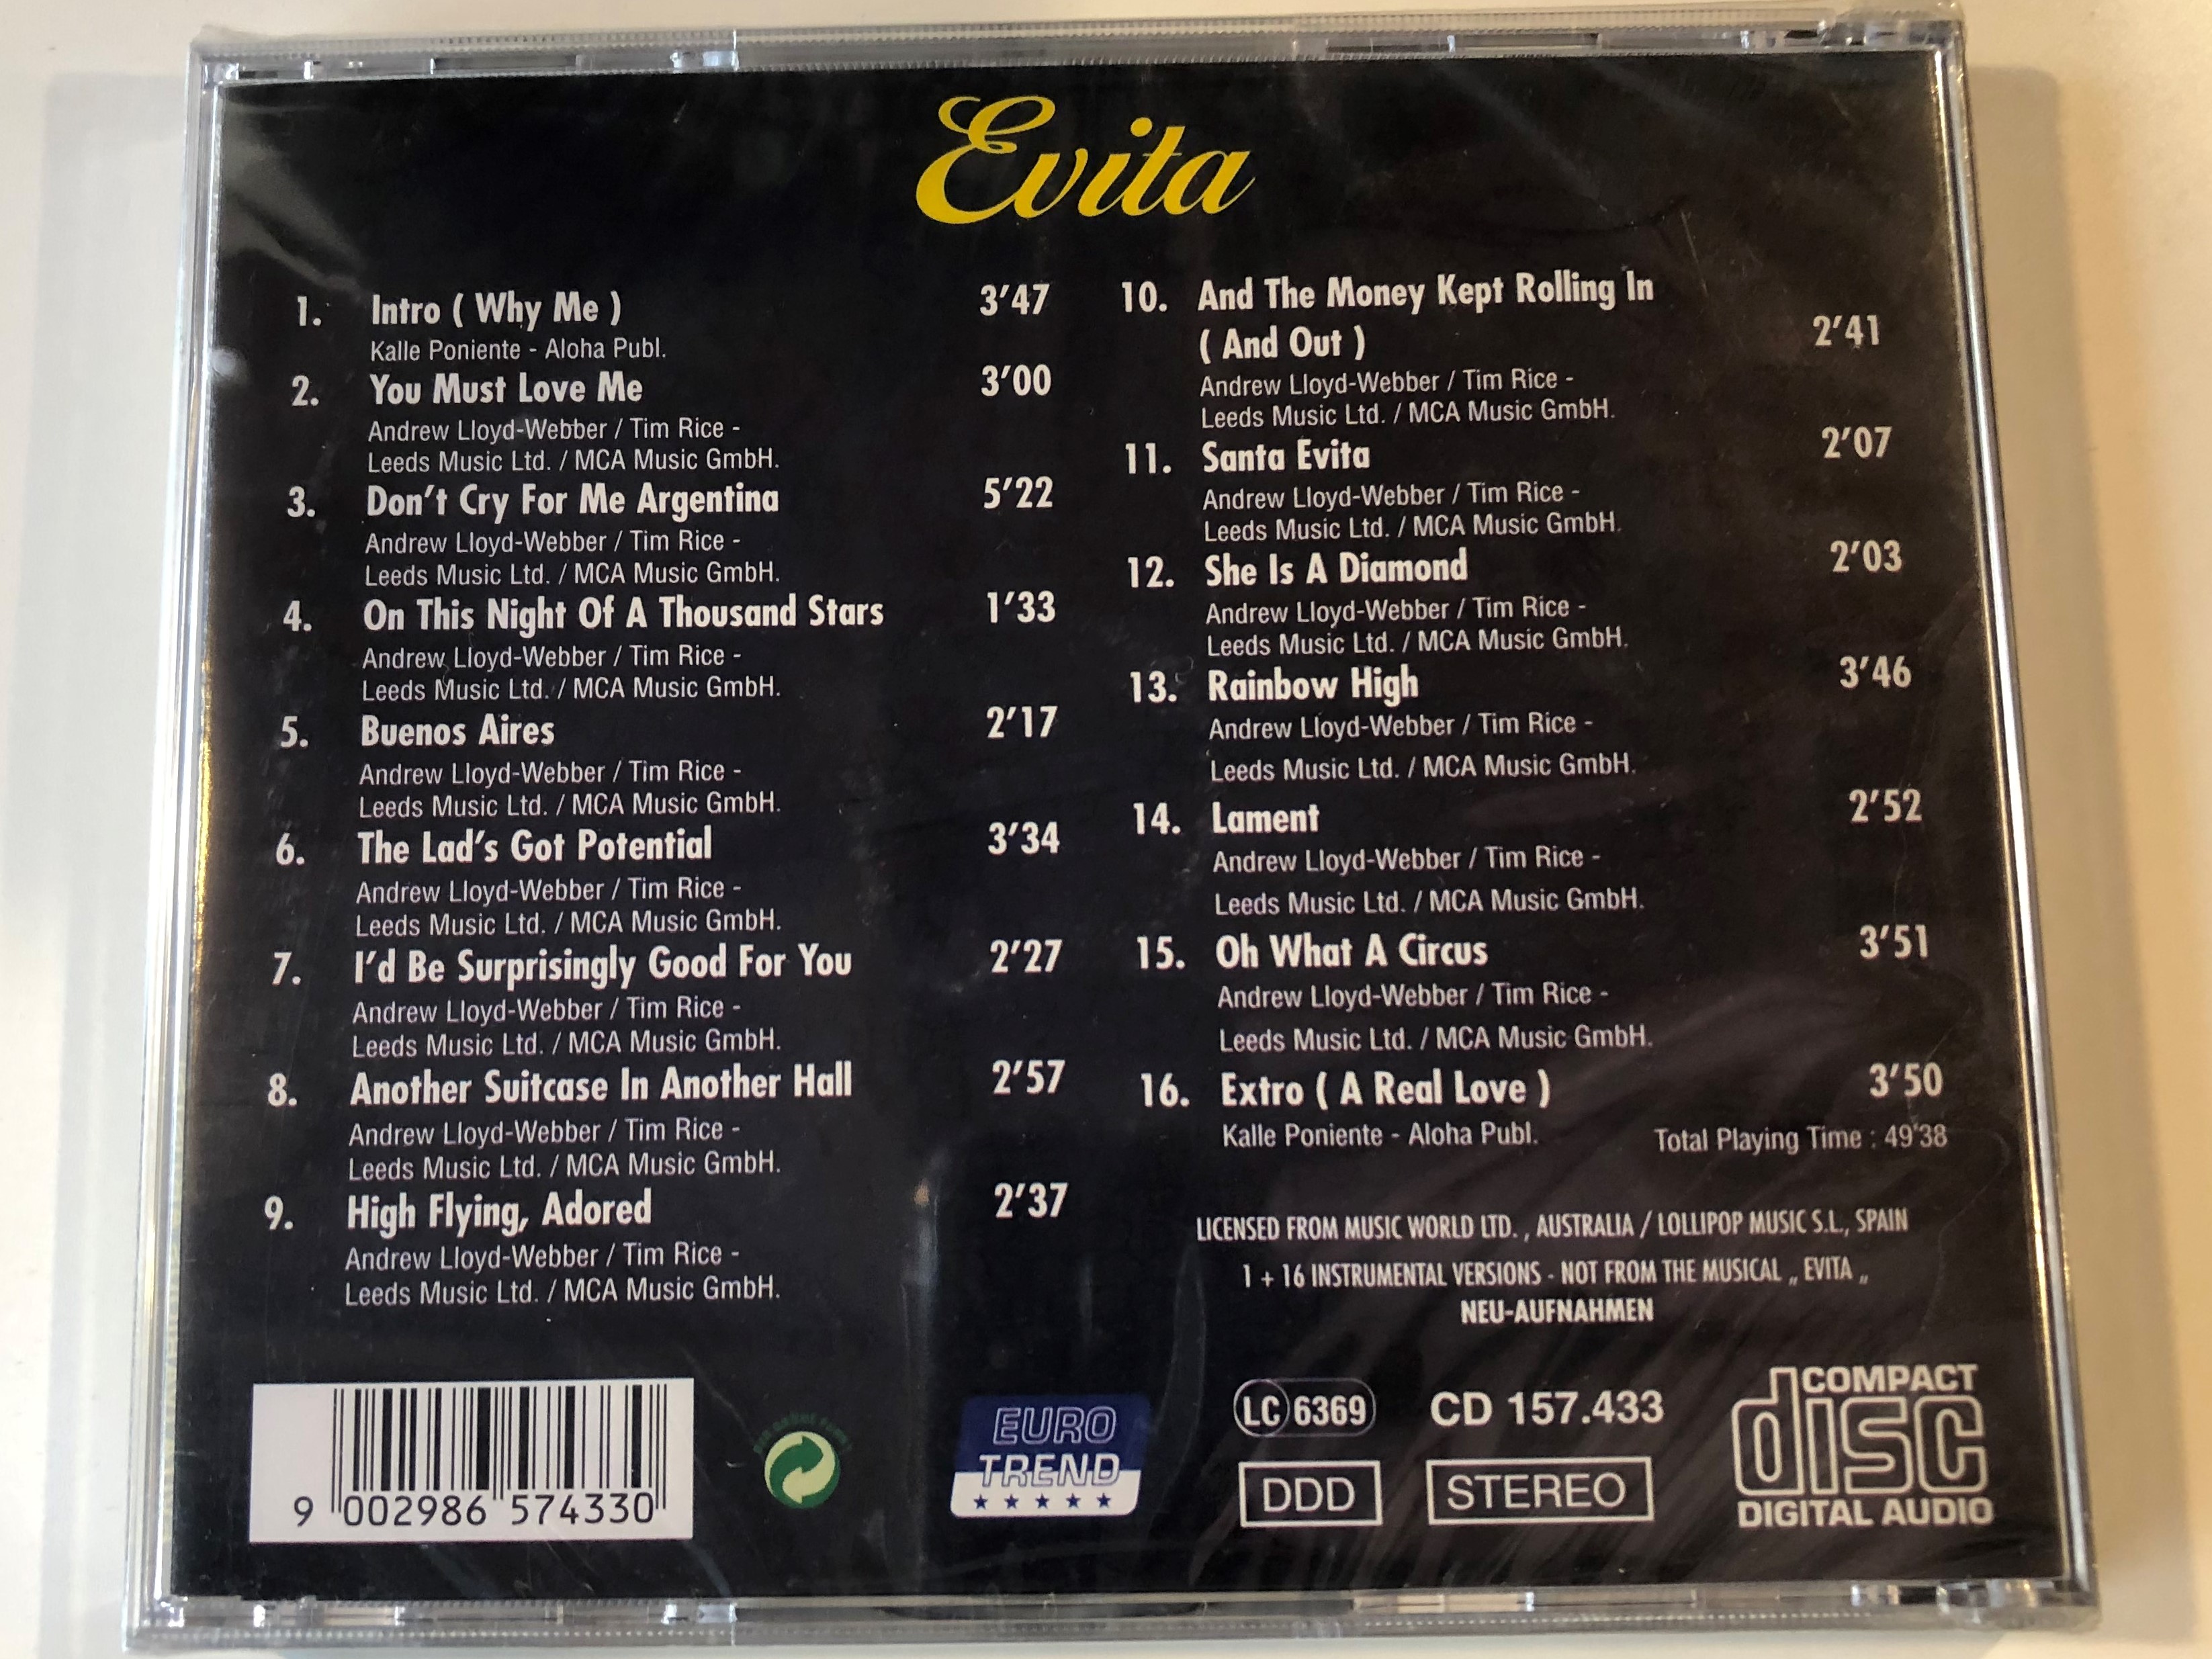 evita-don-t-cry-for-me-argentina-eurotrend-audio-cd-cd-157-2-.jpg